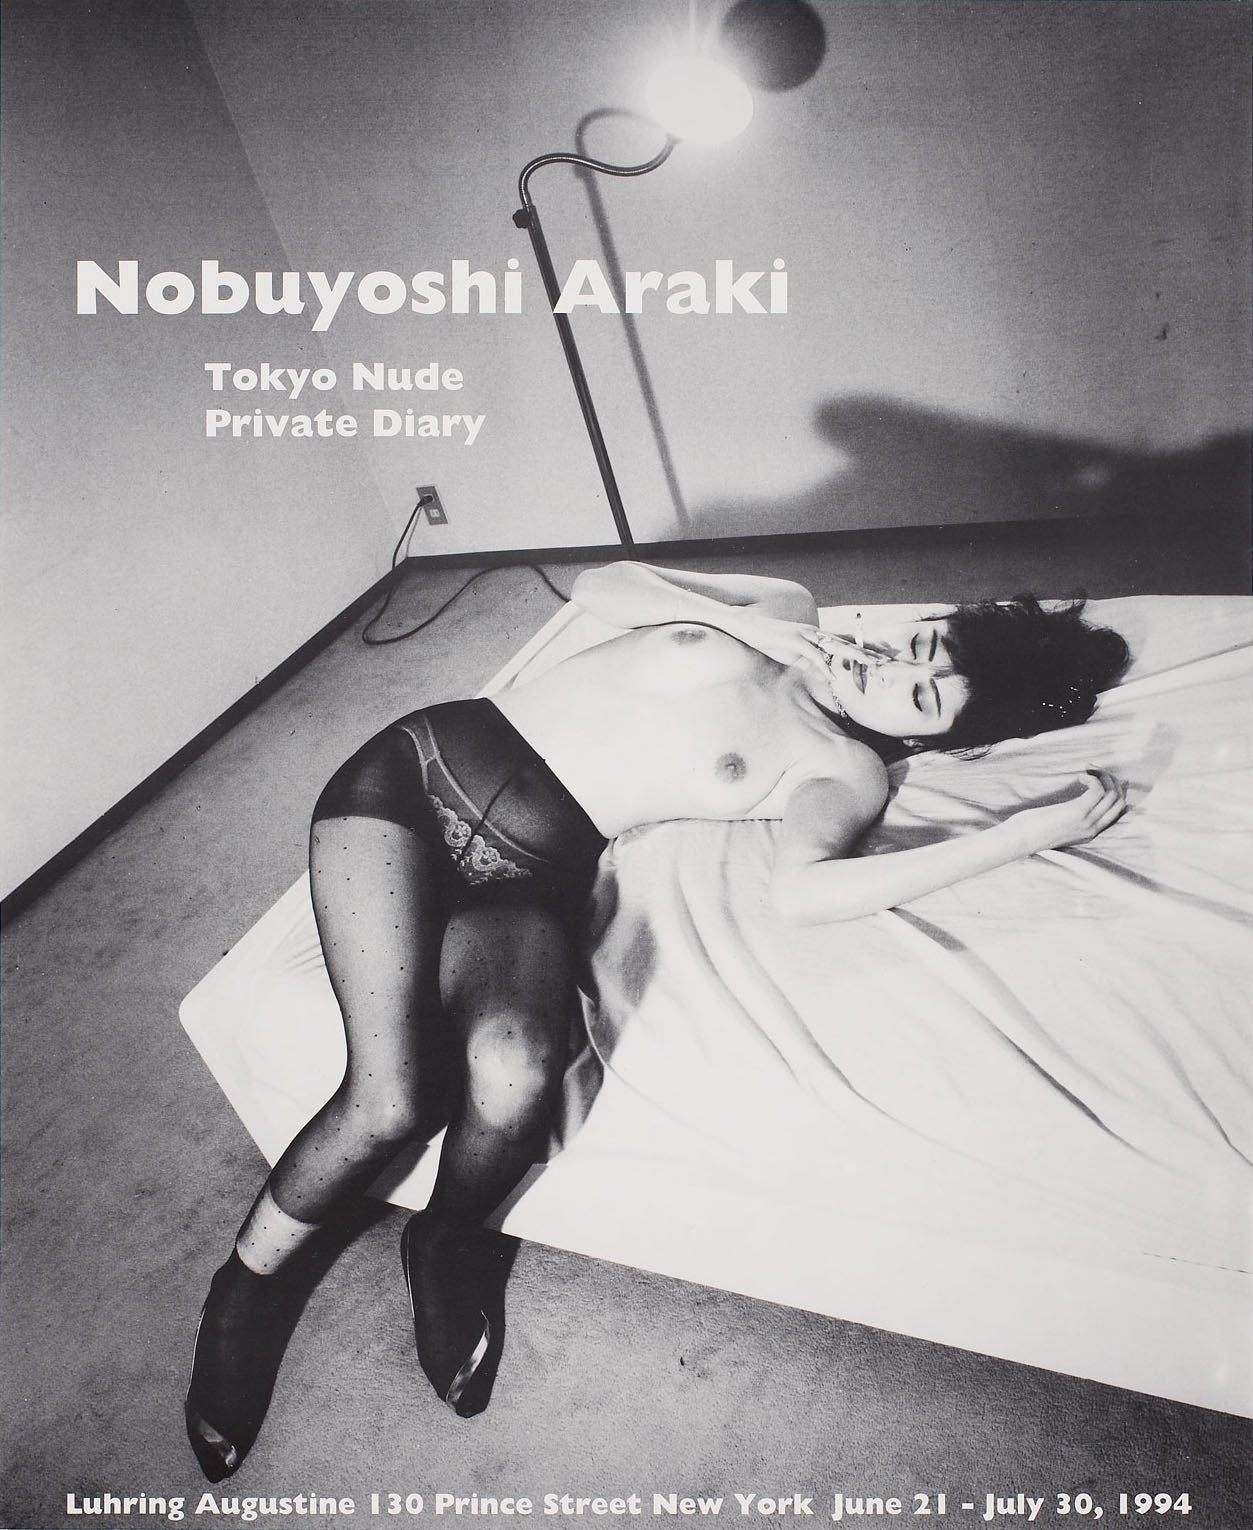 Poster from Nobuyoshi Araki's 1994 exhibition, featuring a photograph of topless woman on a bed in a bare room. 